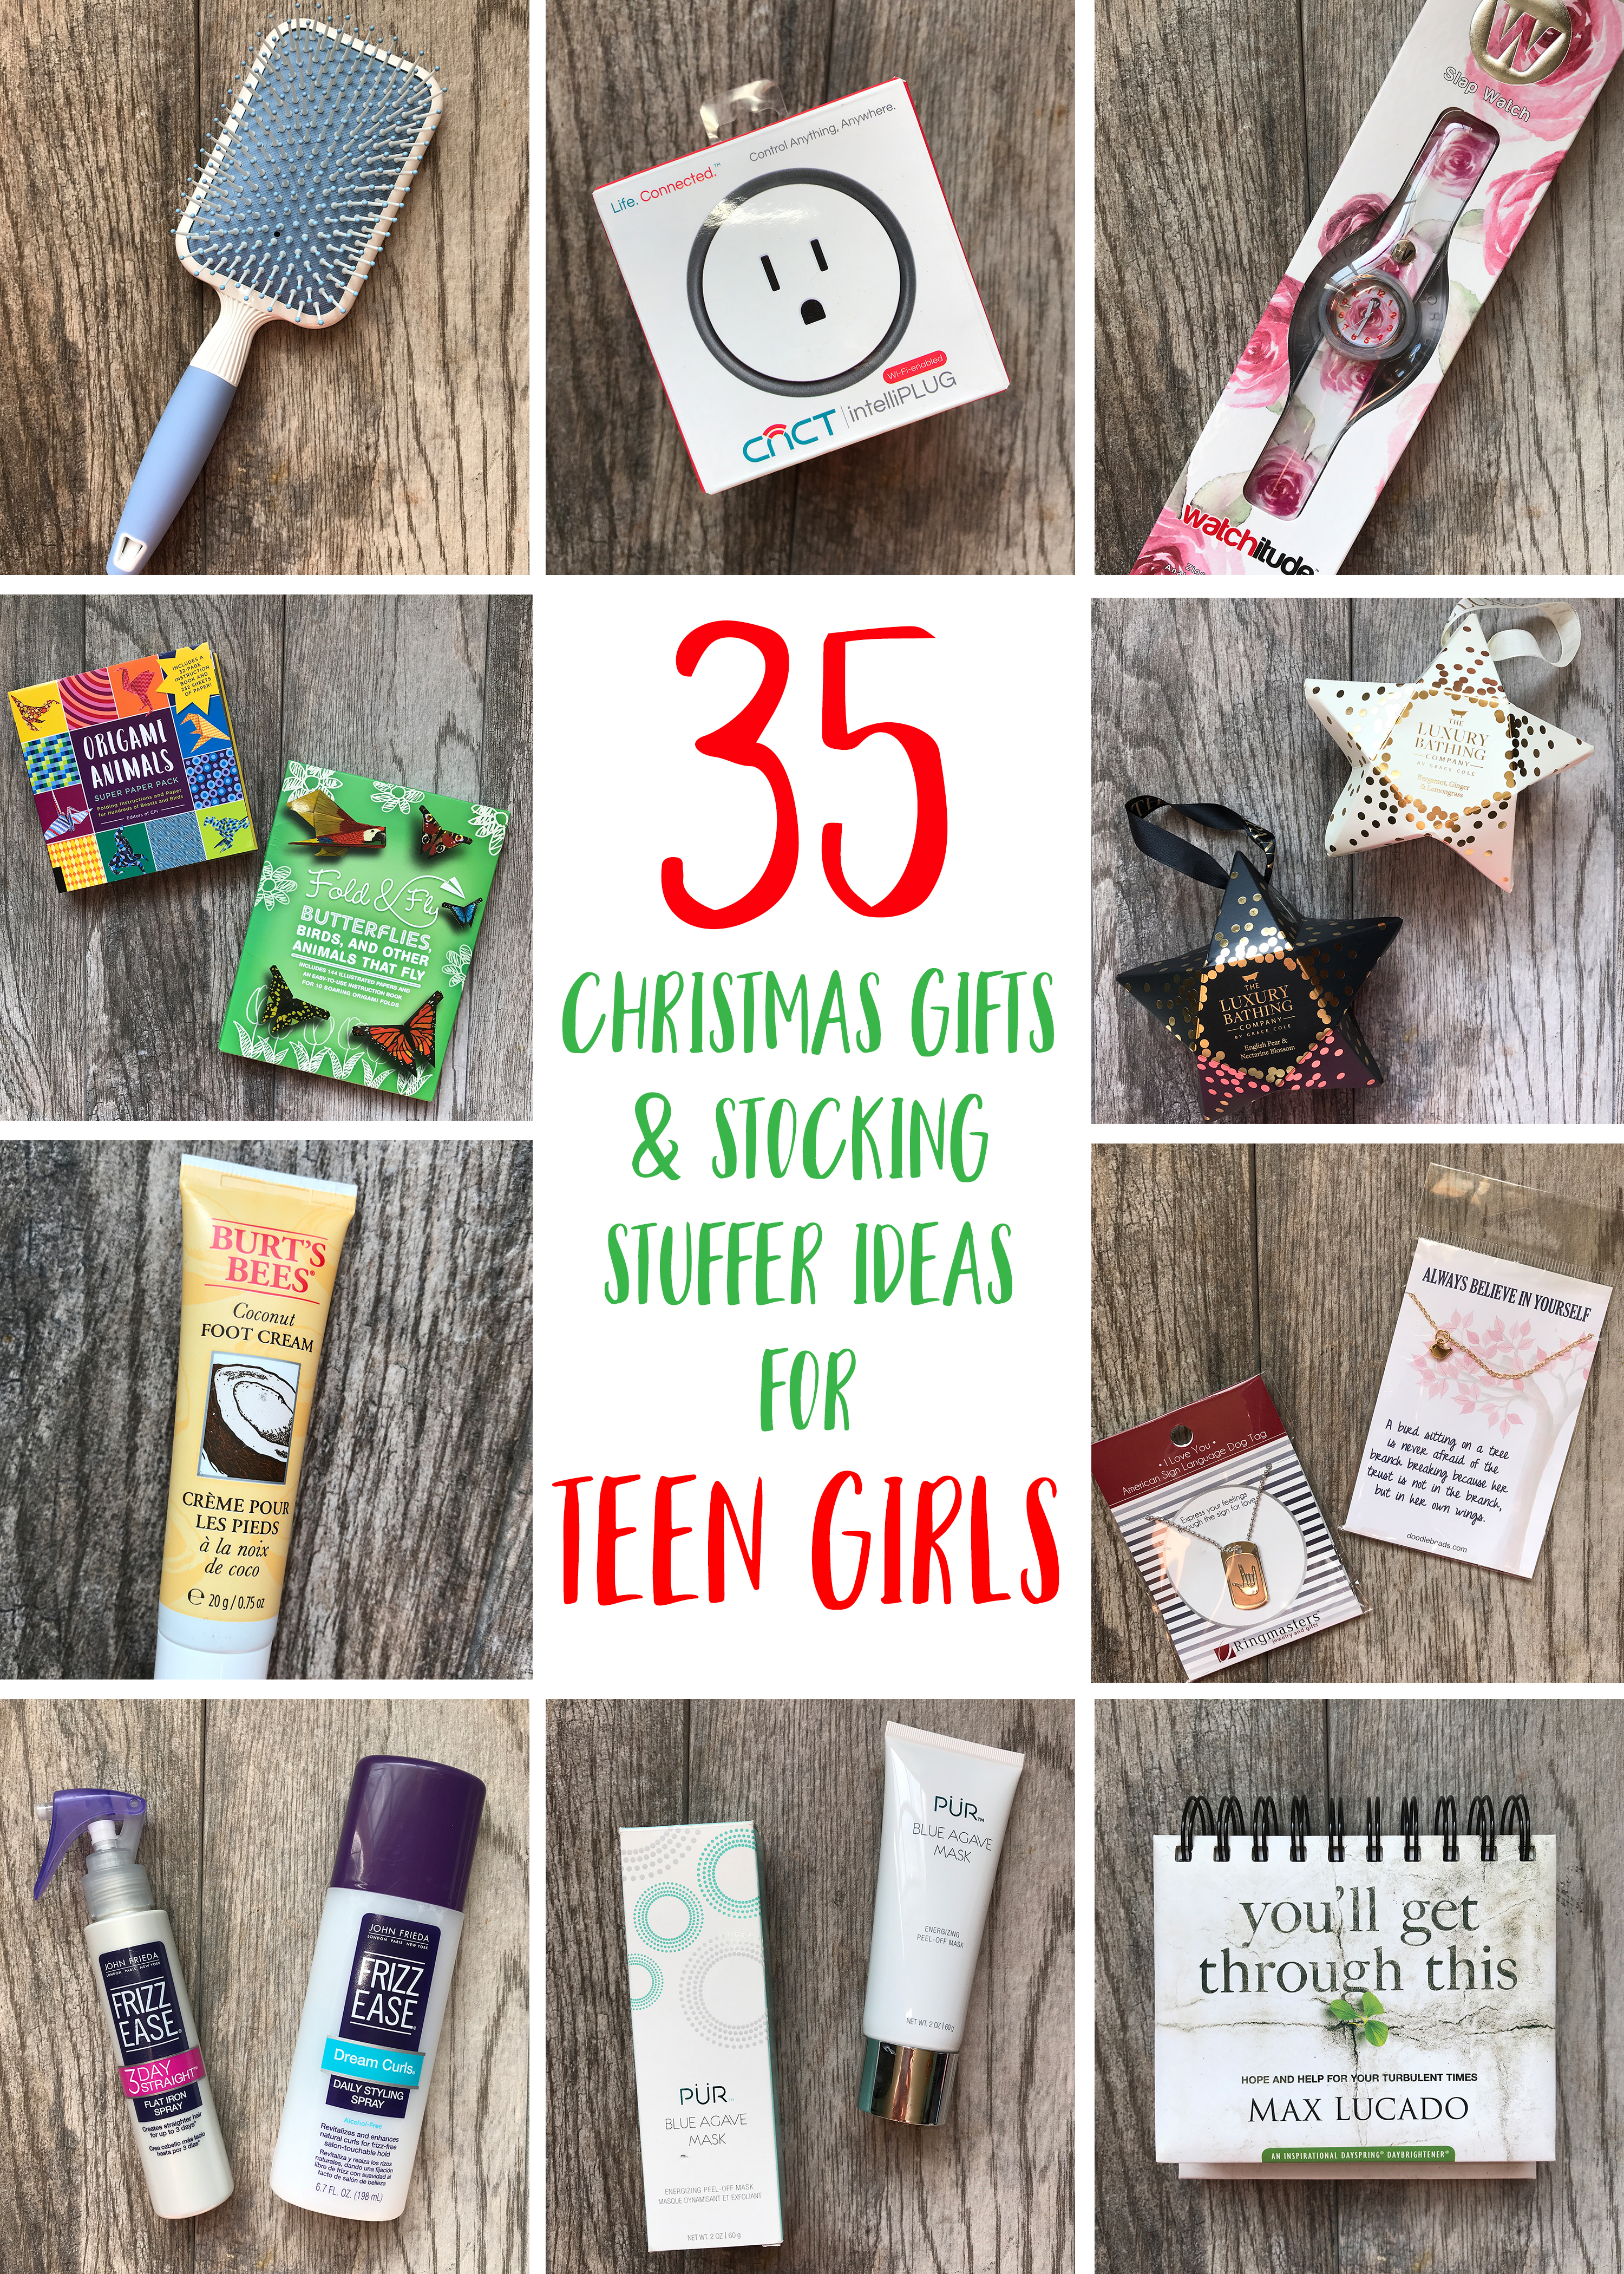 STOCKING STUFFERS FOR TEENS, WHAT I GOT MY TEENAGE DAUGHTER FOR HER  STOCKING